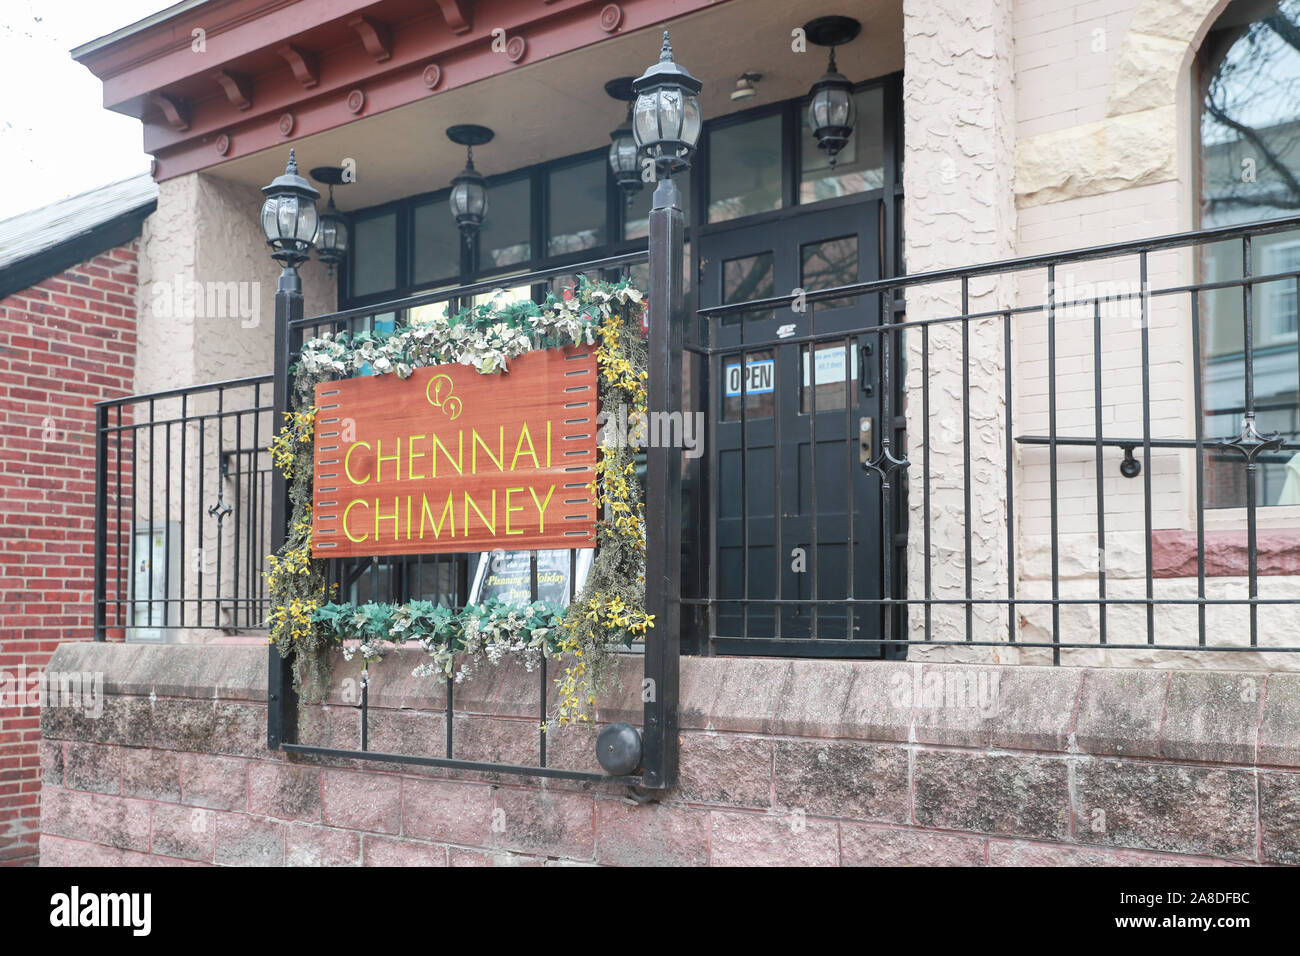 Princeton New Jersey November 11 2019:Chennai Chimney restaurant front.Set in the historic town of  Princeton, New Jersey, Chennai Chimney, an Indian Stock Photo